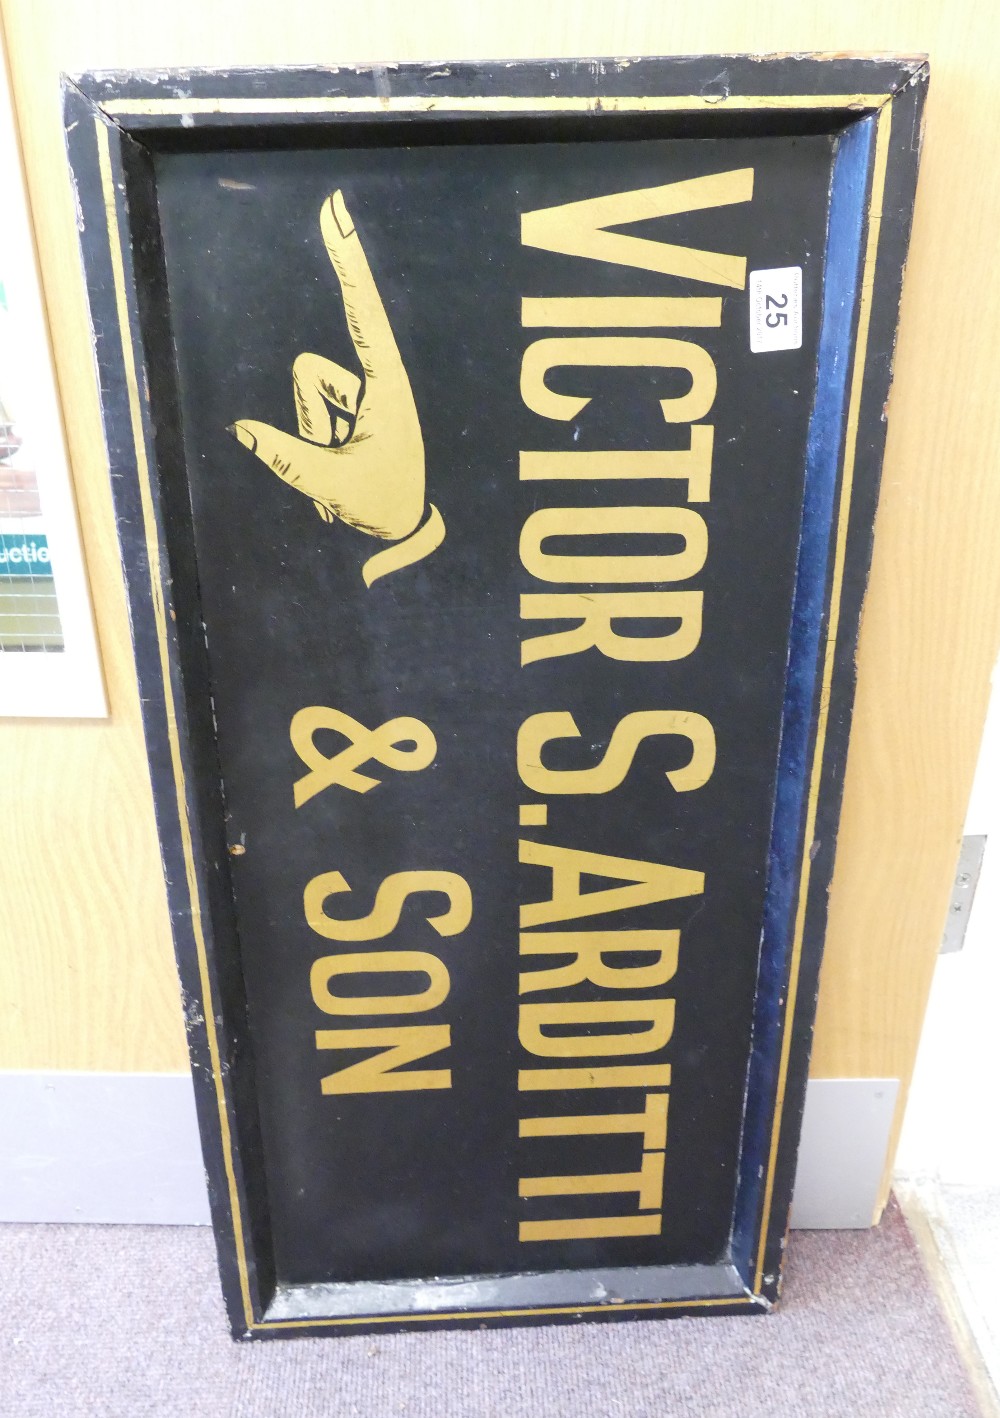 Sign written board for Victor S Arditti & Son. Size 80cm x 40cm.